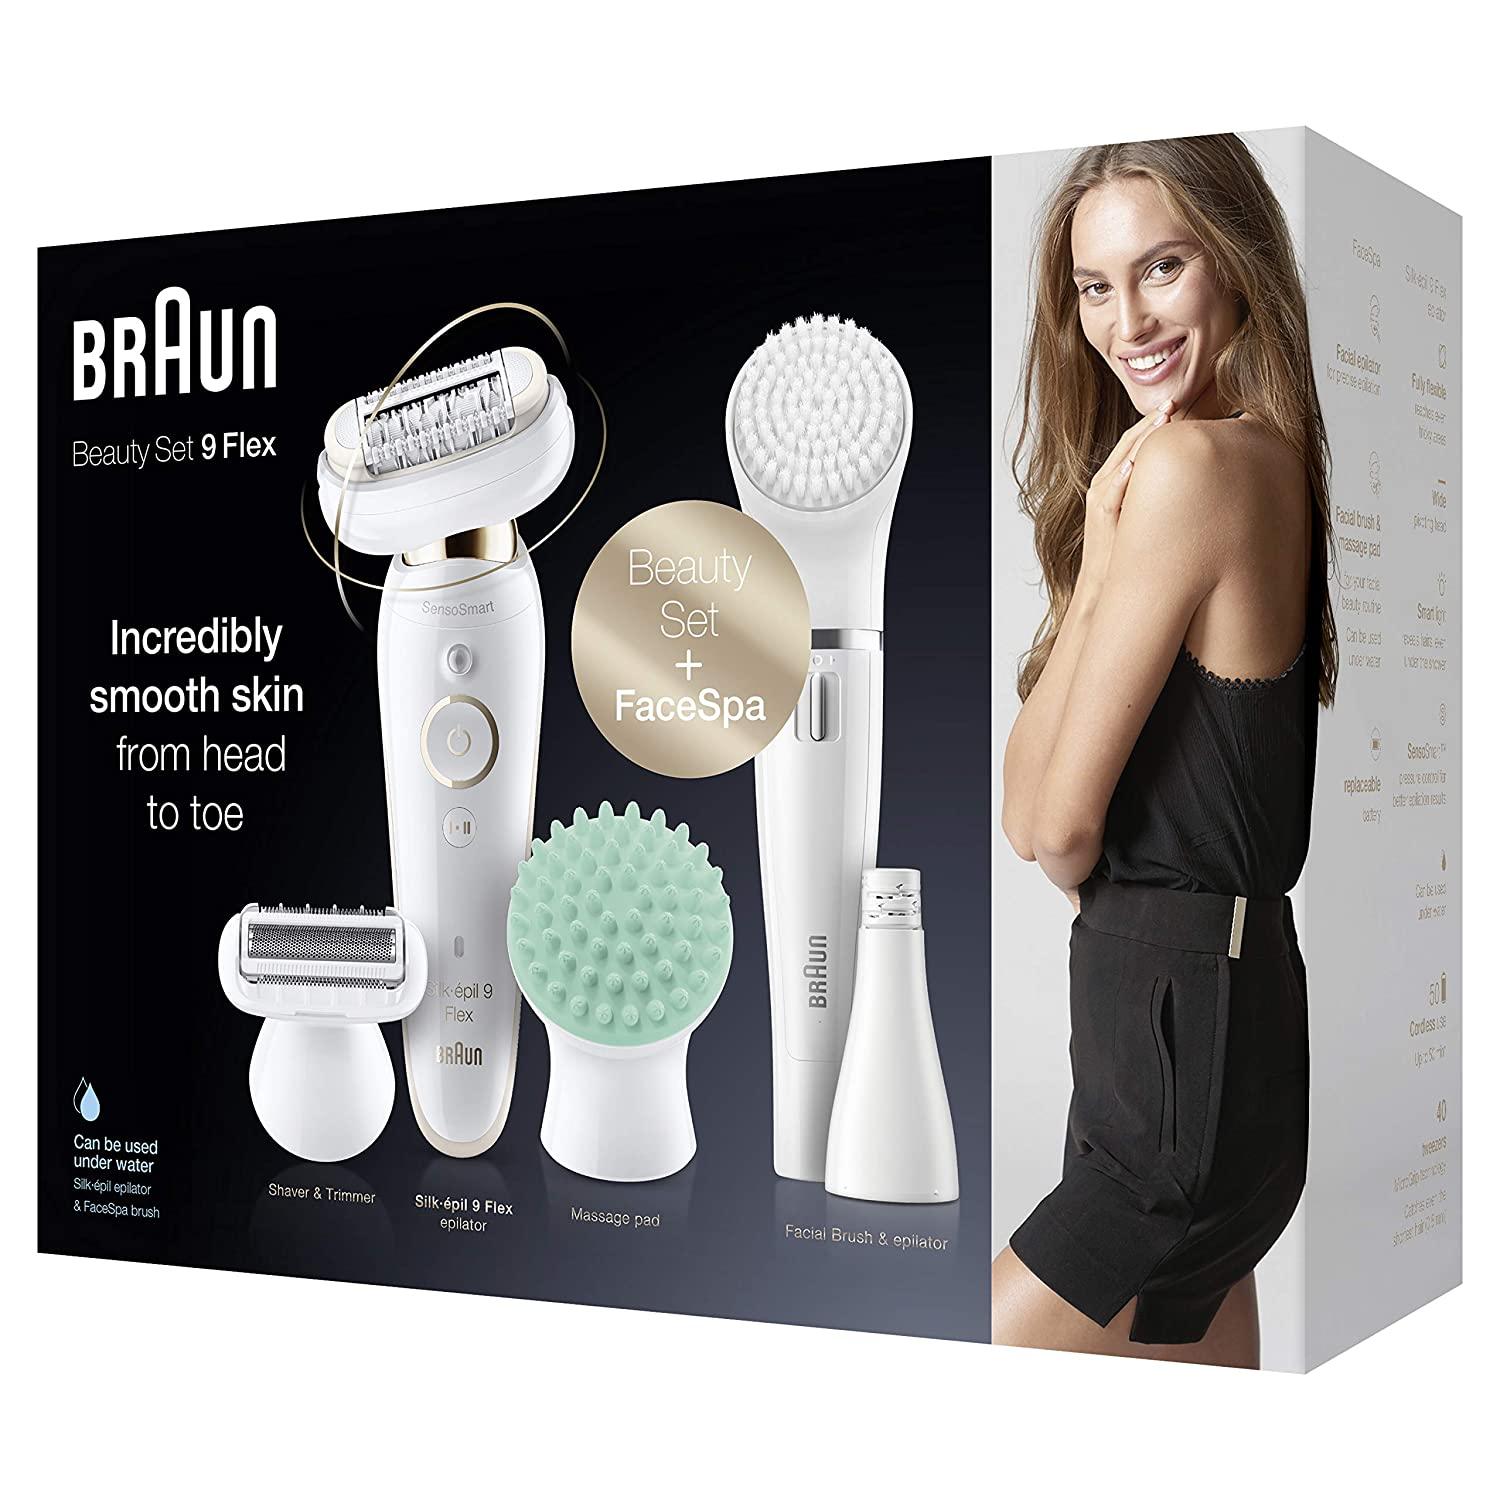 Braun Epilator Silk-épil 9 9-030 with Flexible Head, Facial Hair Removal  for Women and Men, Shaver & Trimmer, Cordless, Rechargeable, Wet & Dry,  Beauty Kit with Body Massage Pad – Top Brands Shop